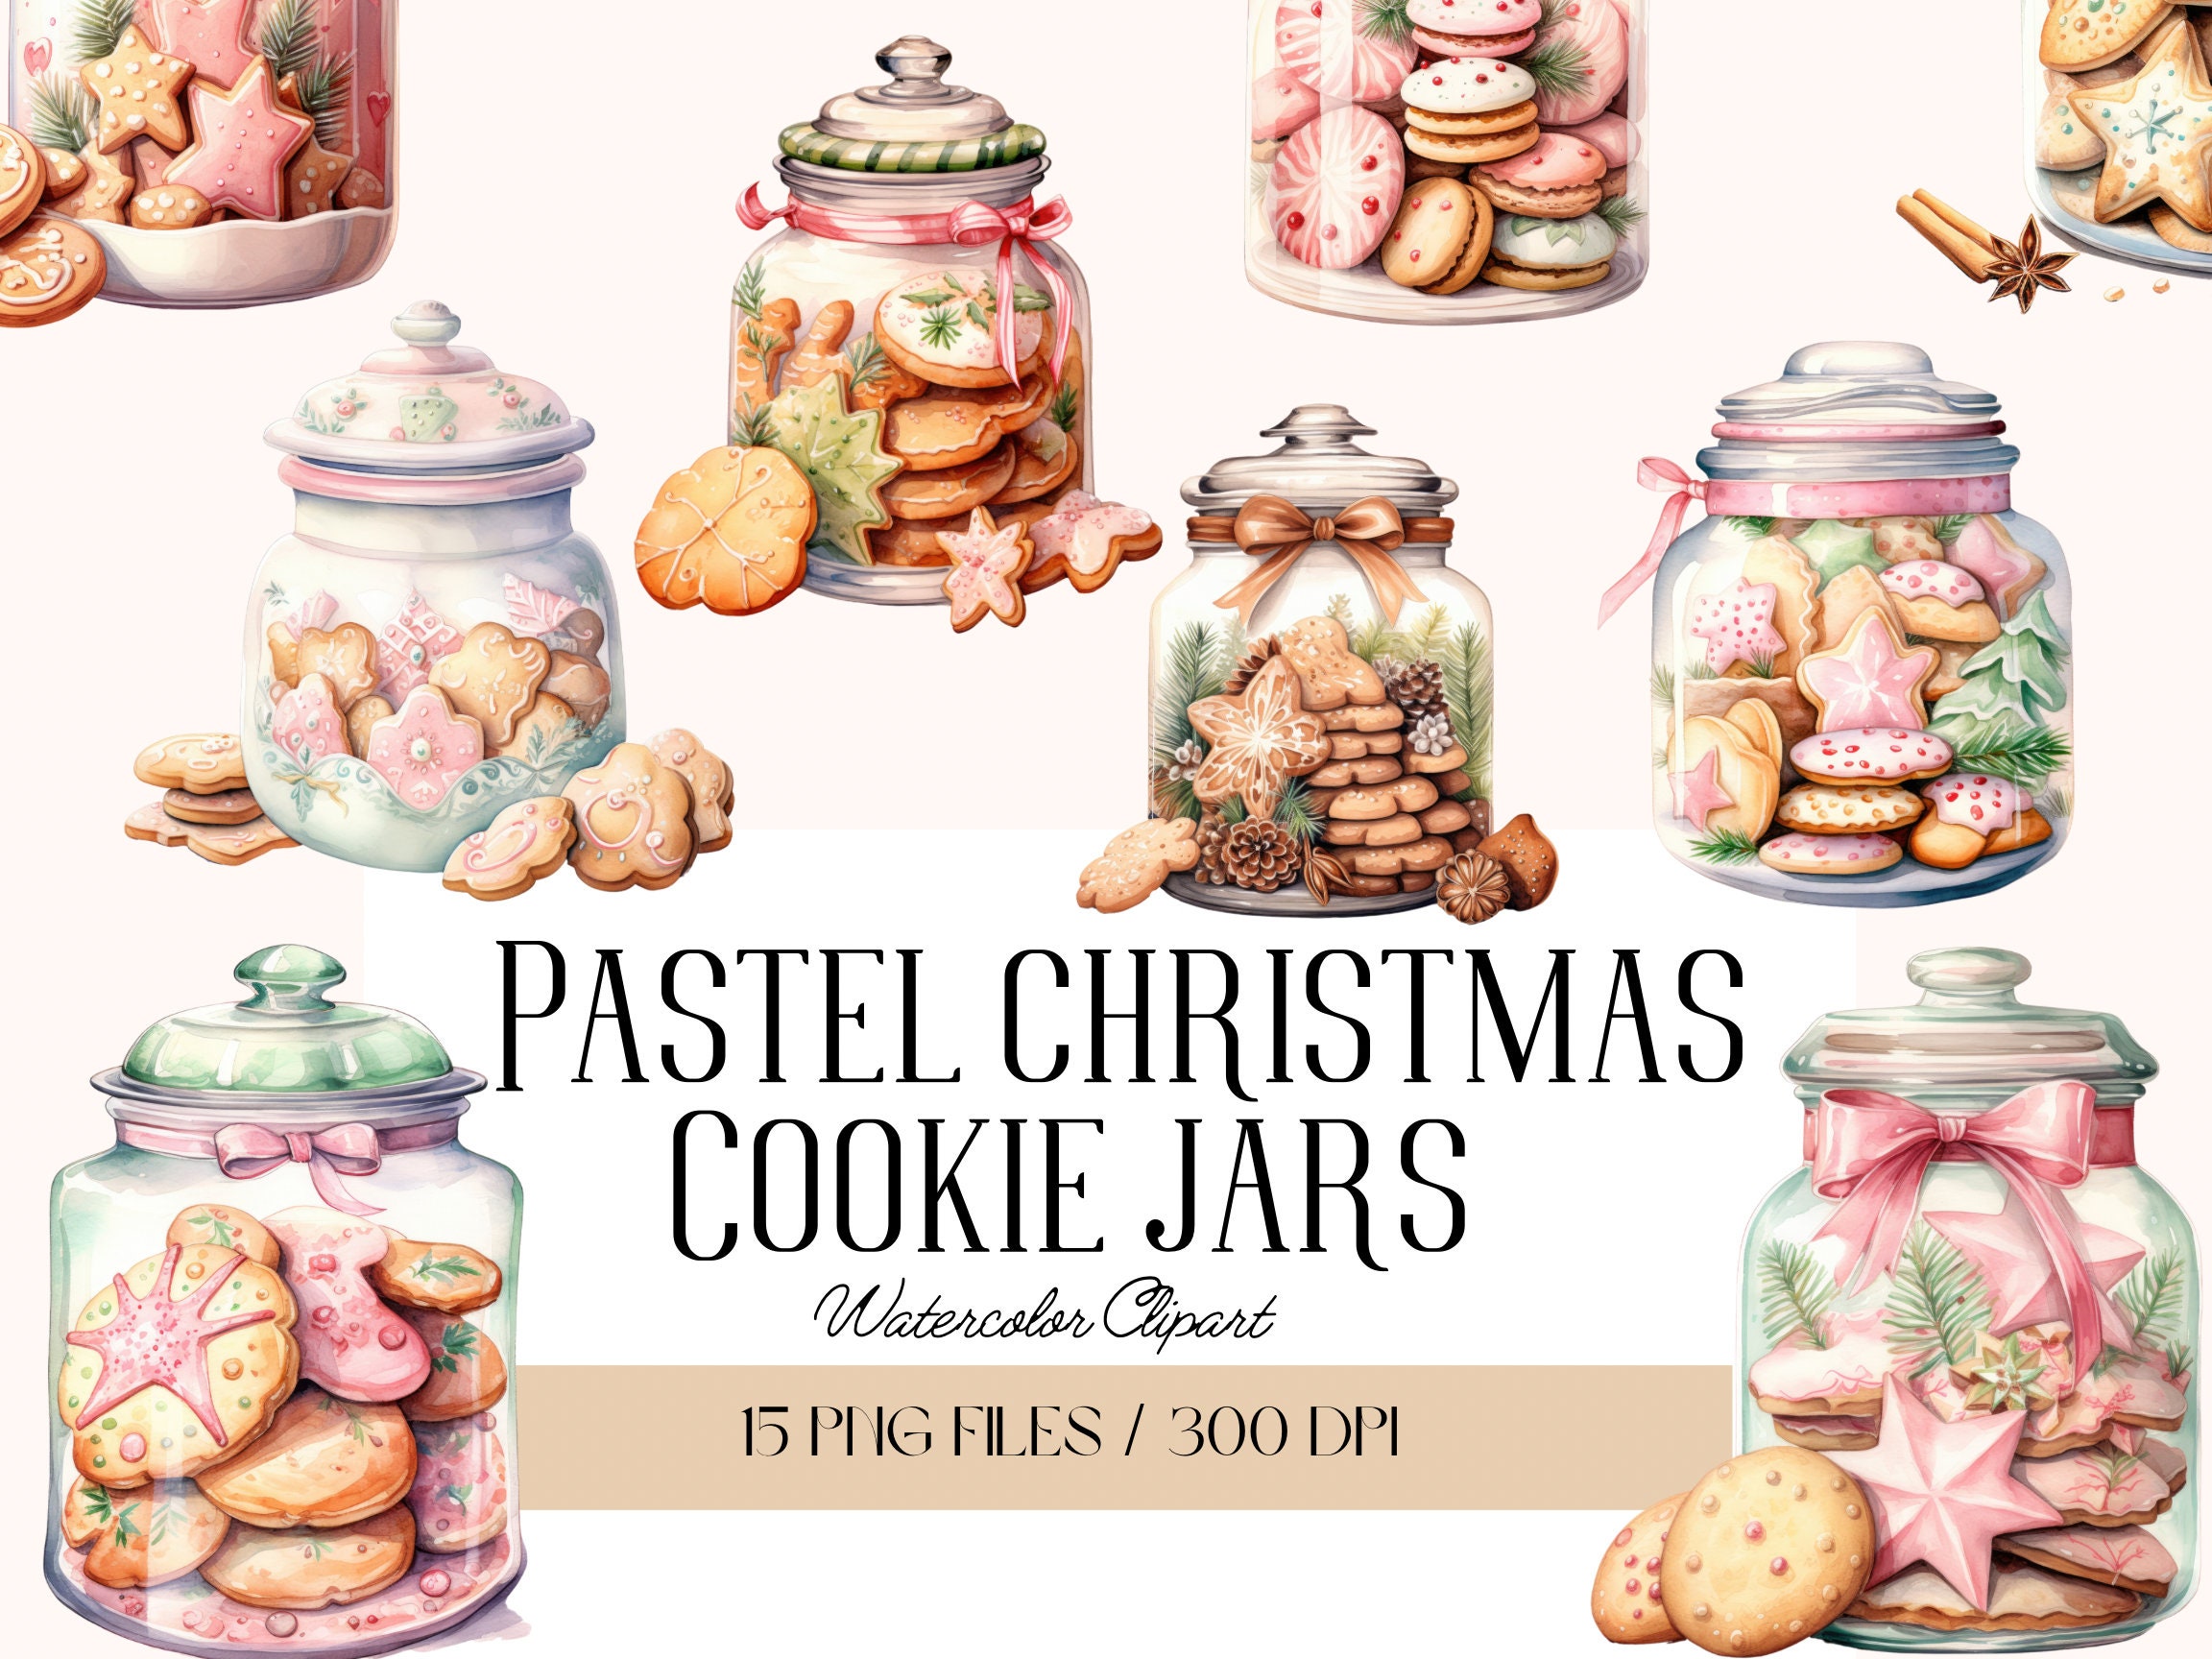 Cookie Jar Picture for Classroom / Therapy Use - Great Cookie Jar Clipart